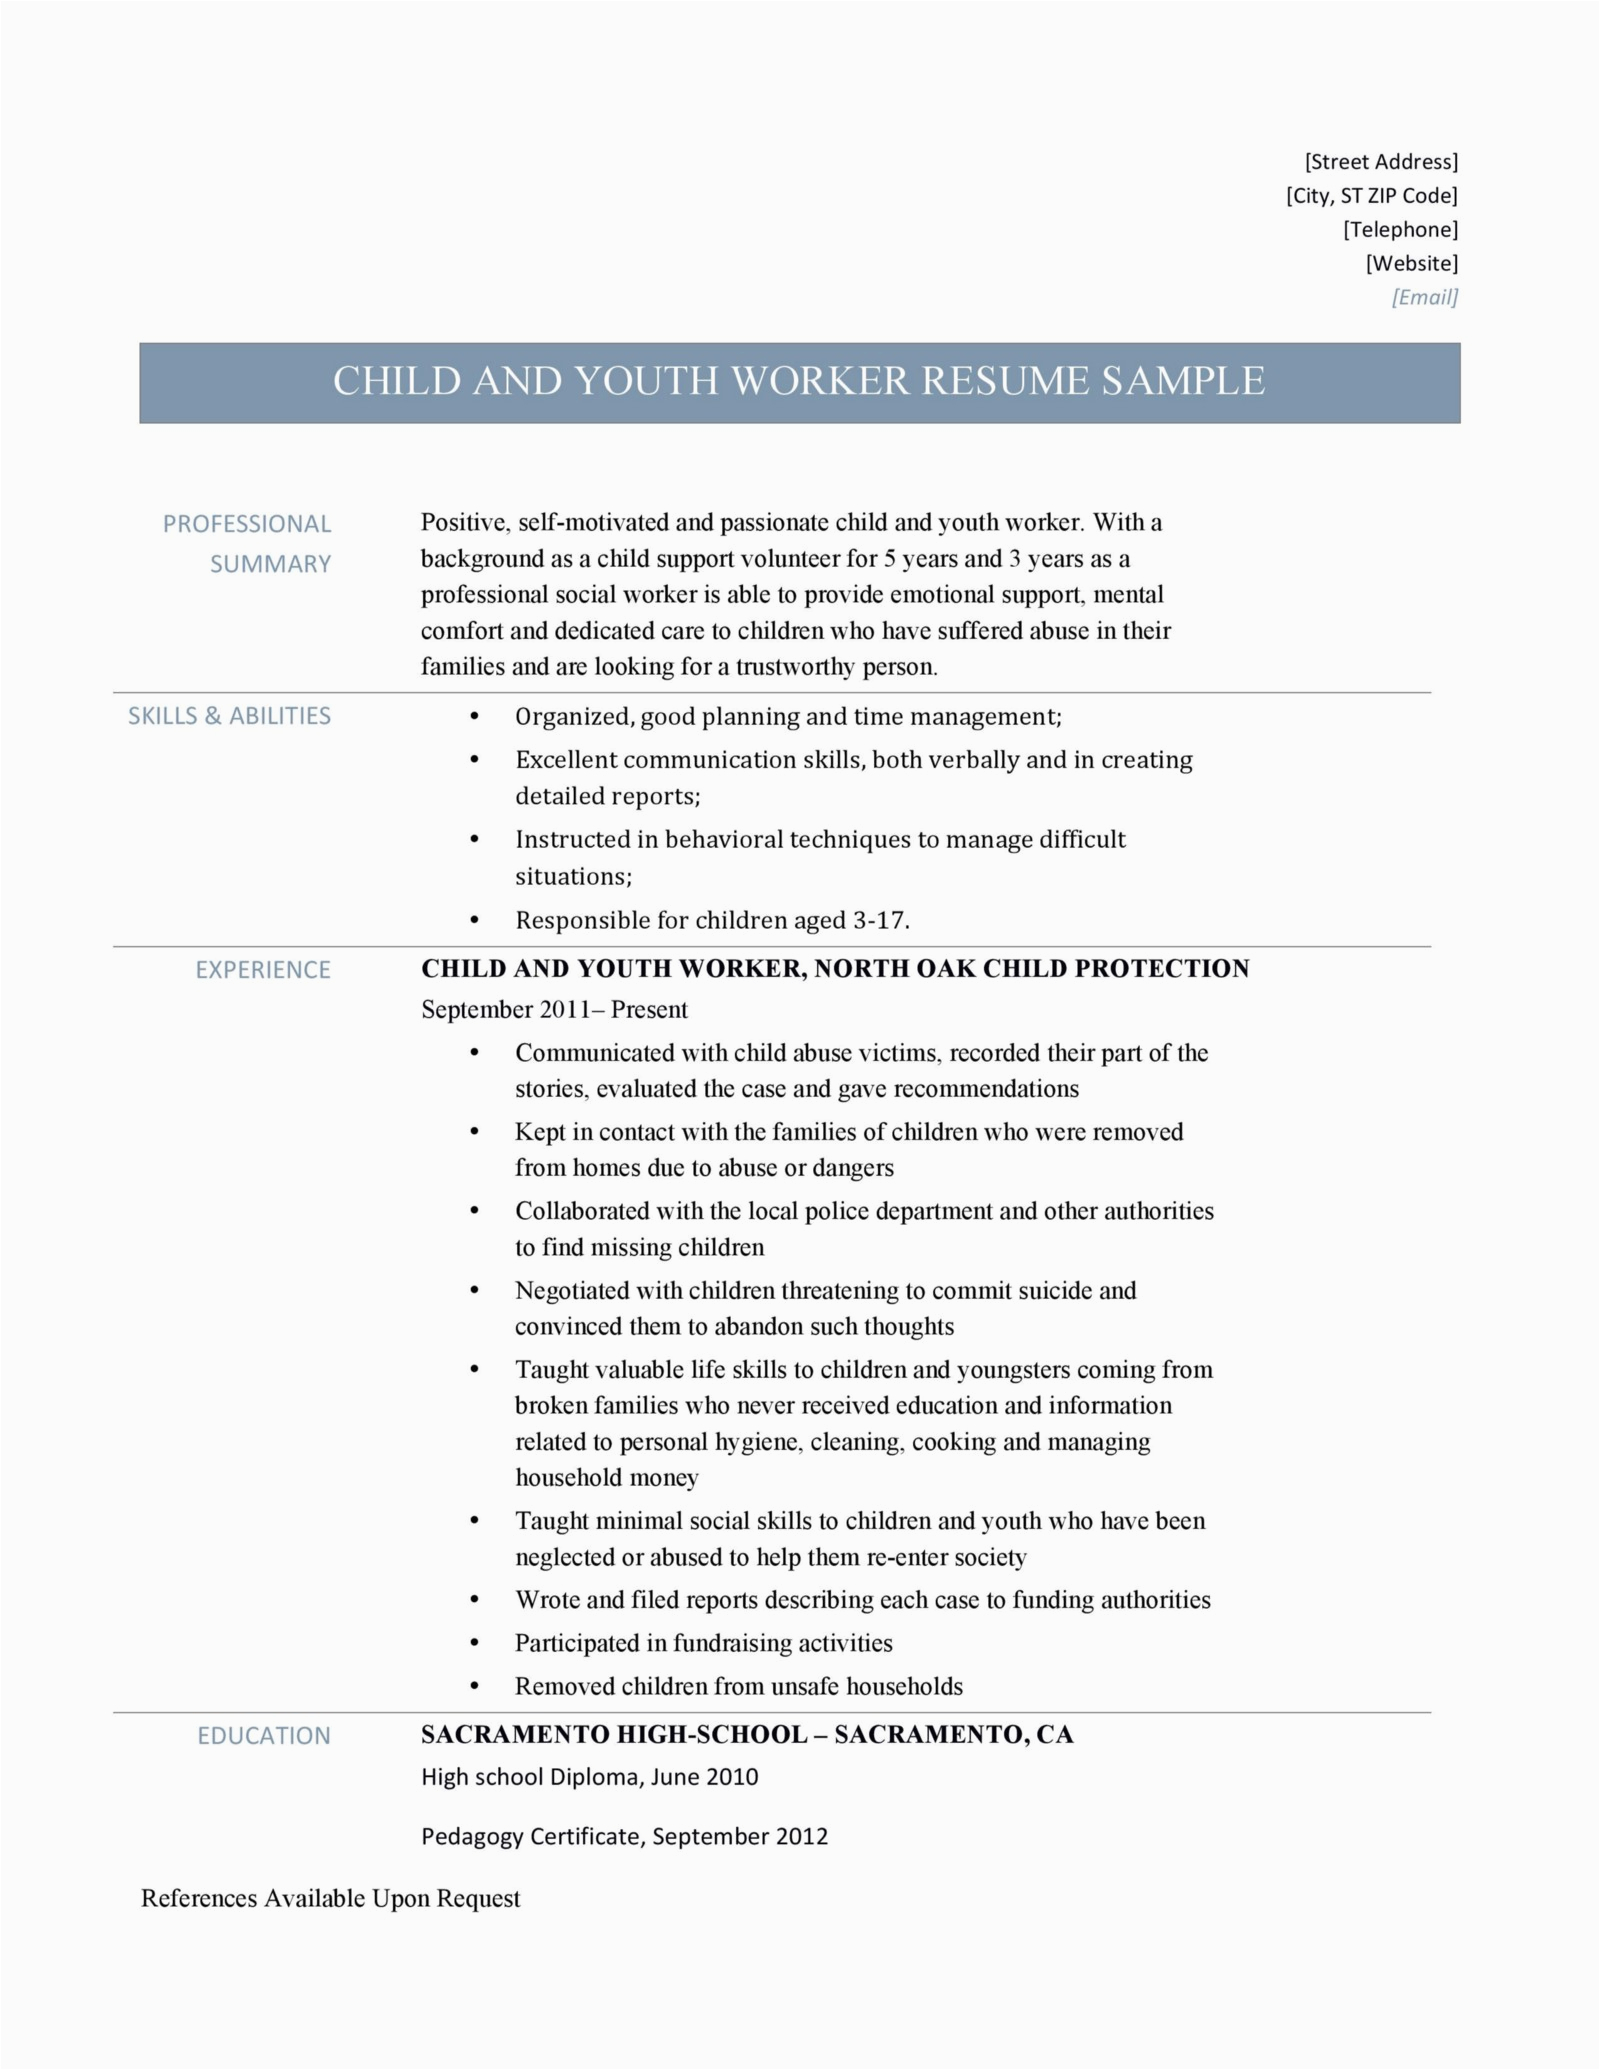 Child and Youth Worker Resume Samples Child and Youth Worker Resume Template and Job Description